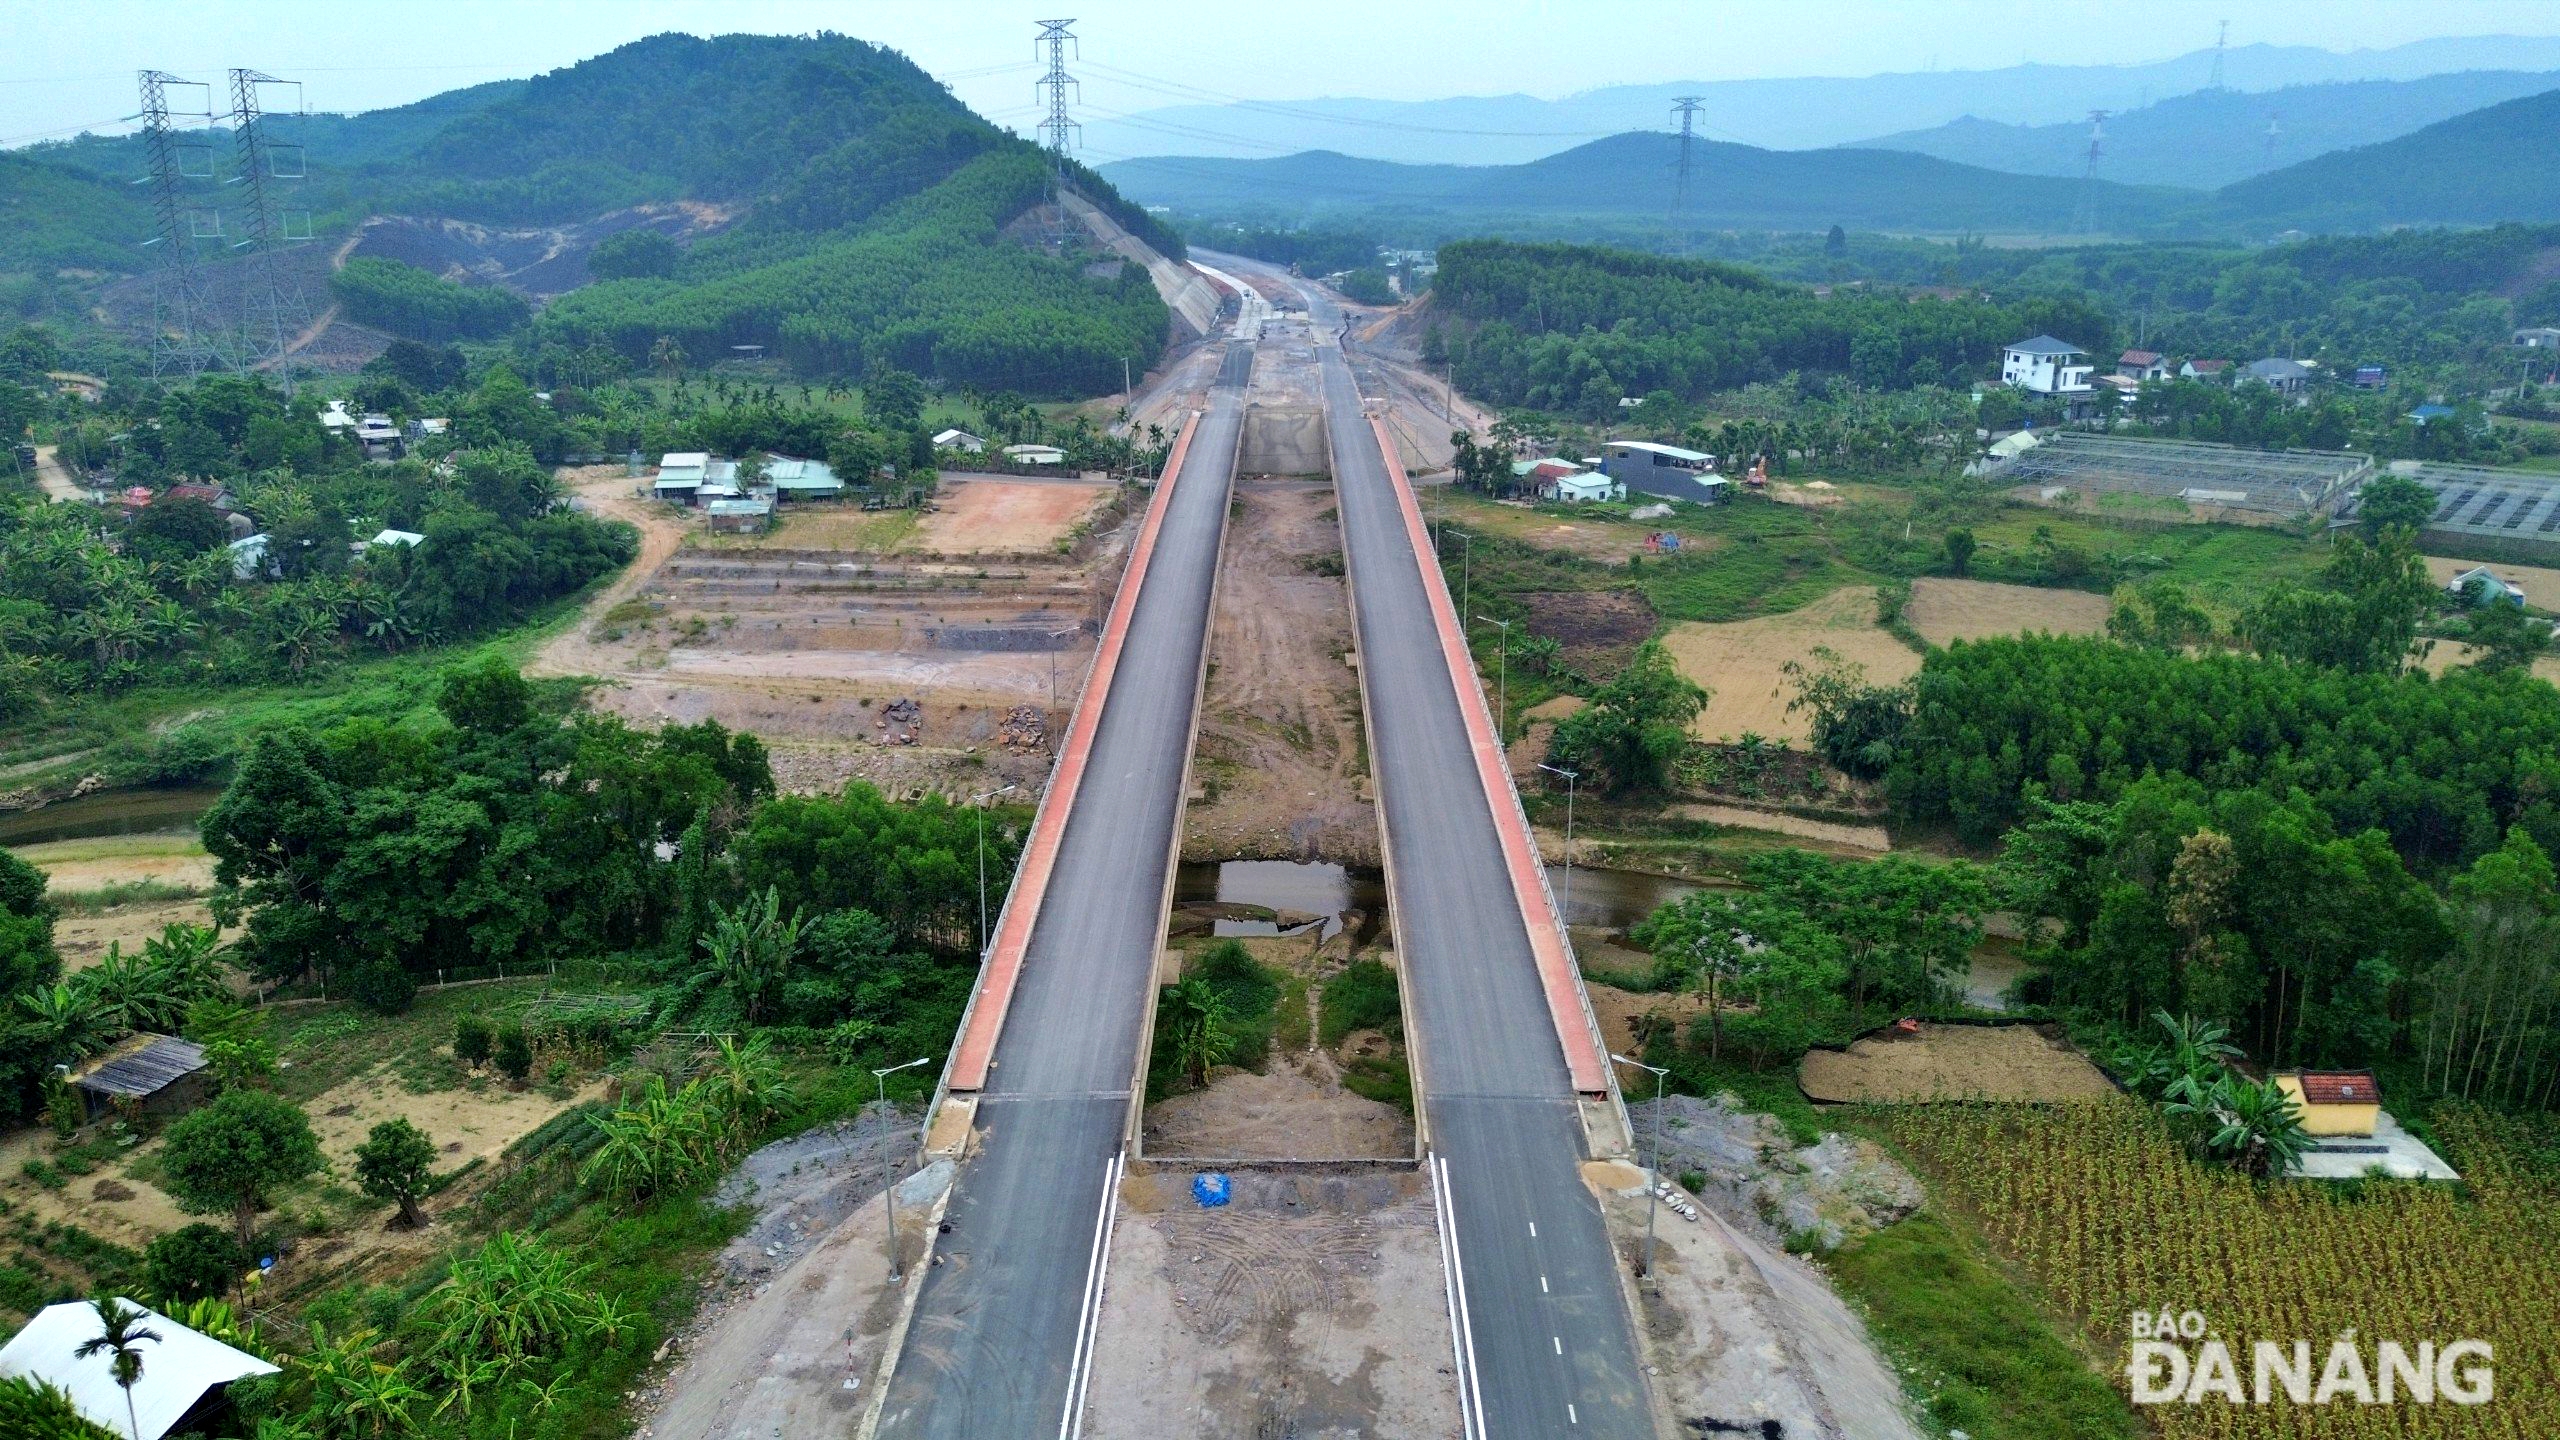 The appearance of the city's key arterial roads is gradually taking shape, connecting transport infrastructure, contributing to the local socio-economic development.